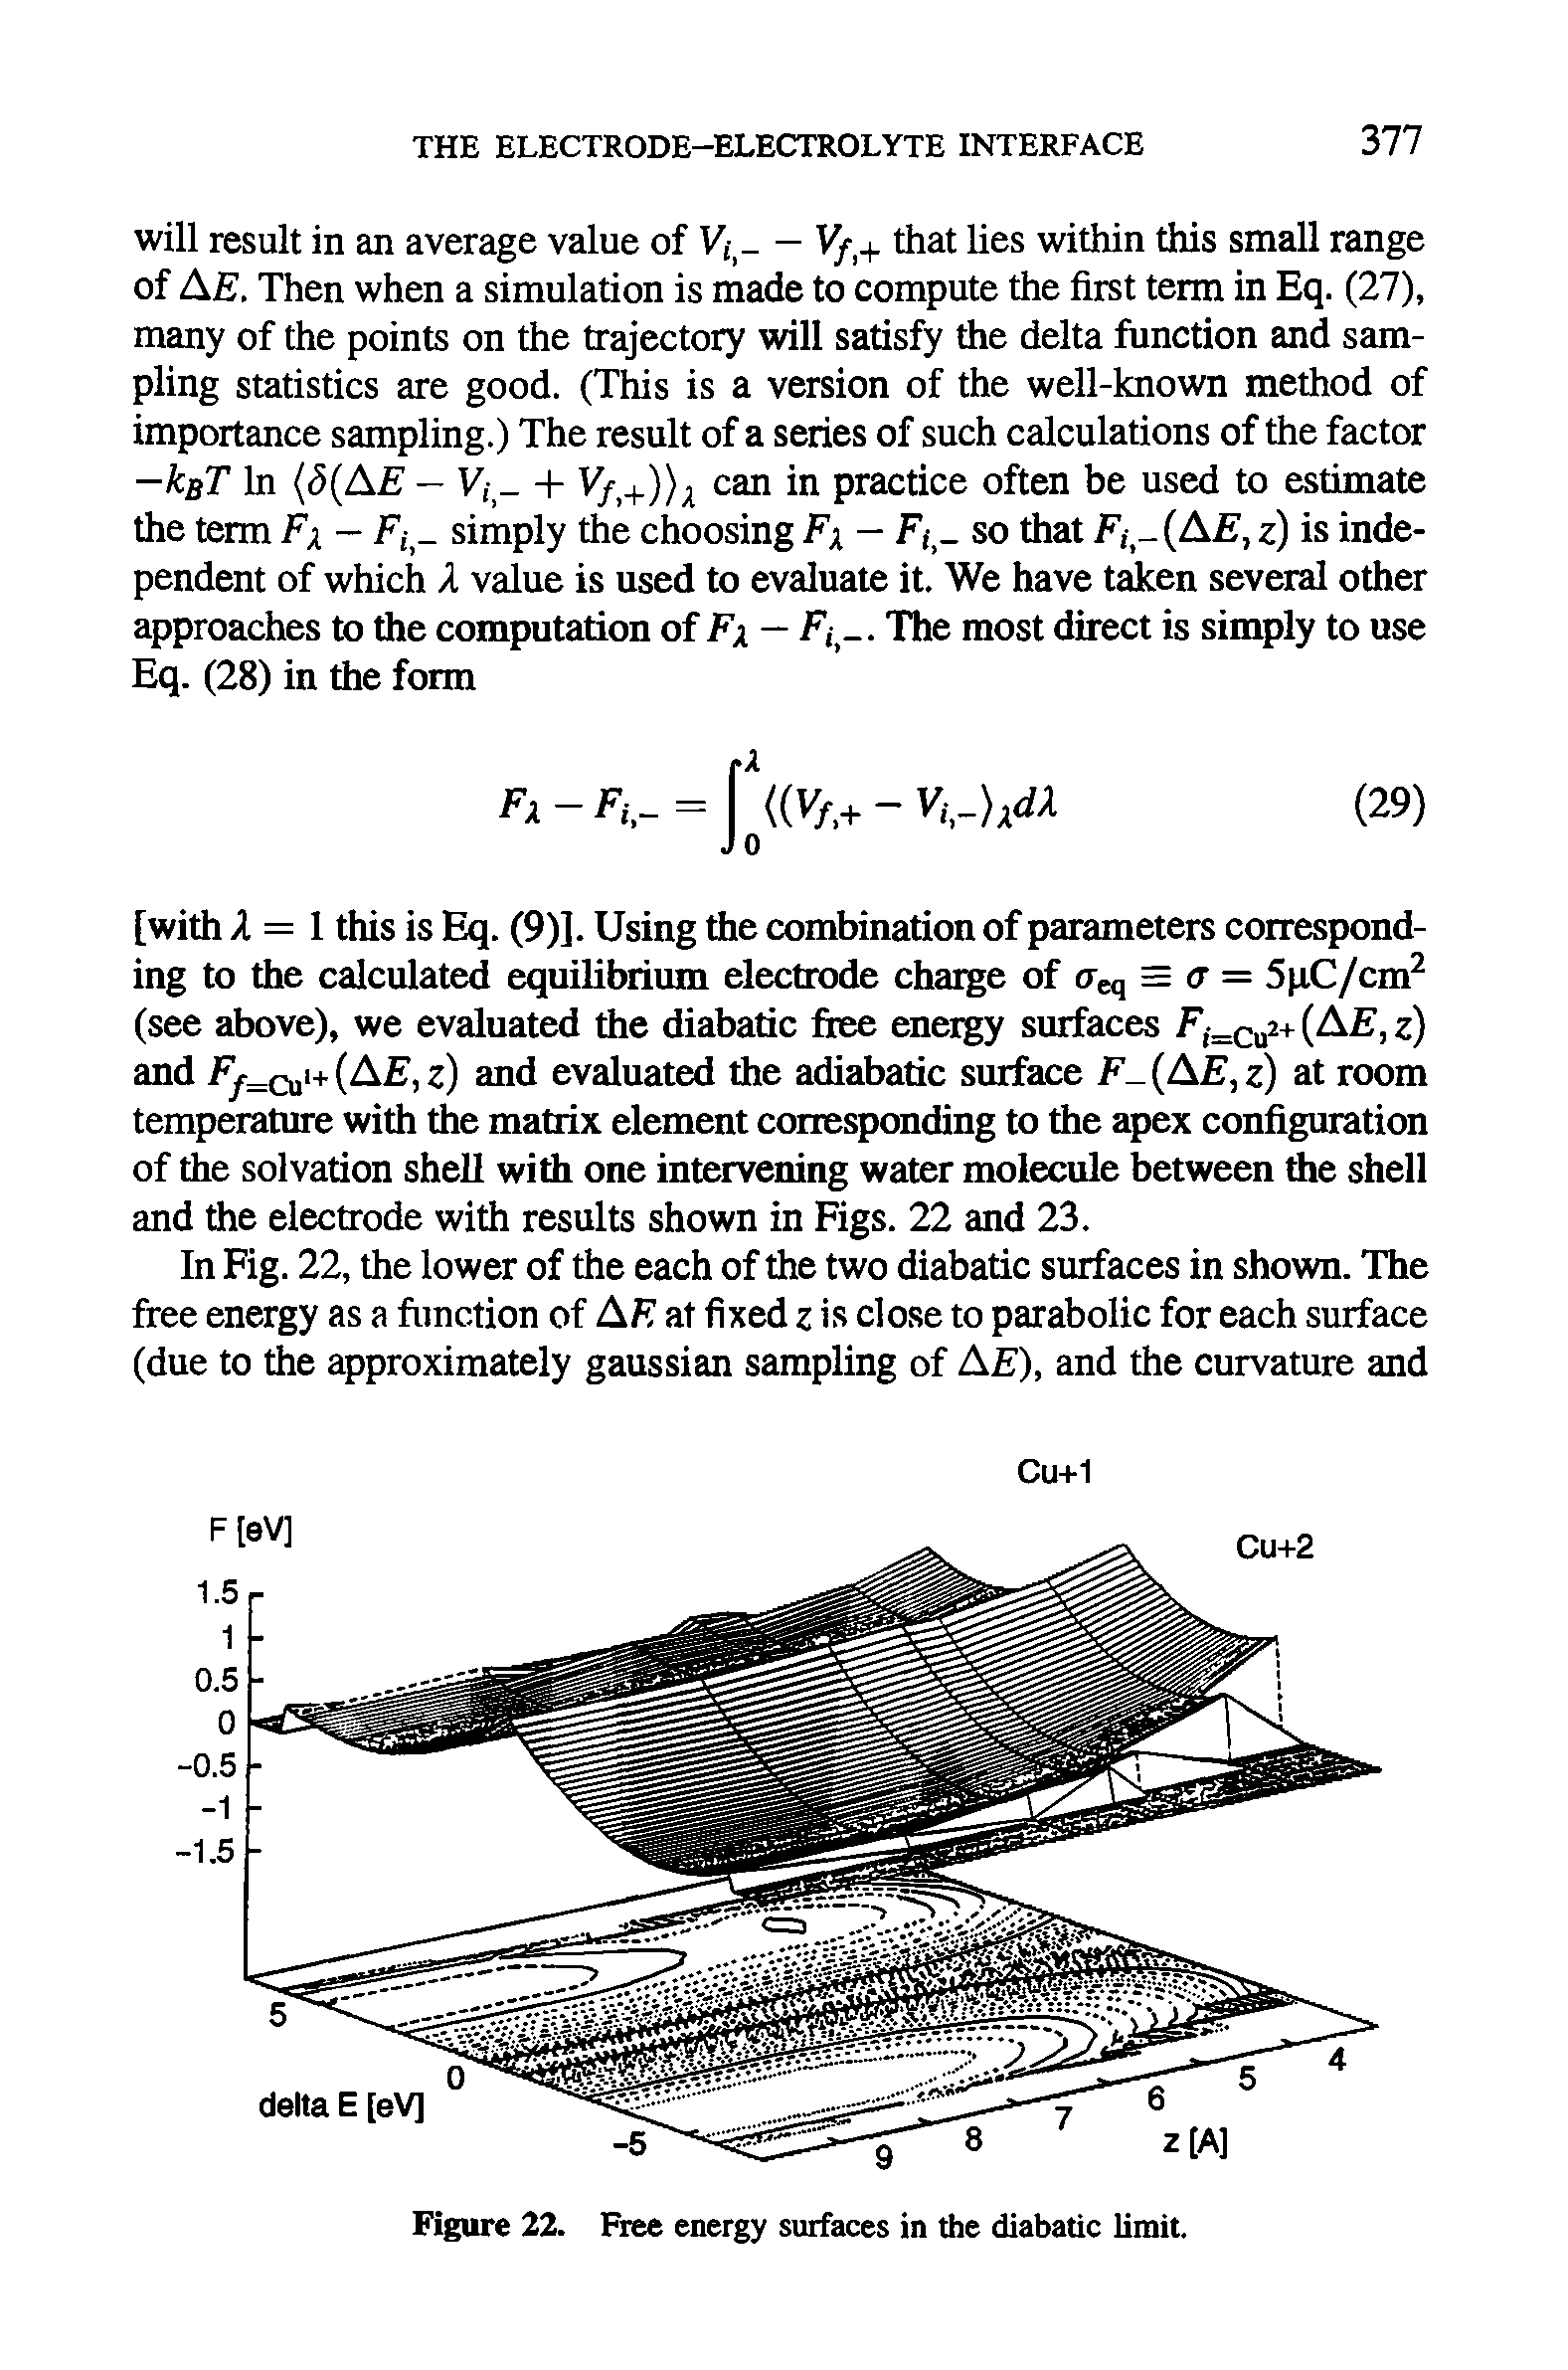 Figure 22. Free energy surfaces in the diabatic limit.